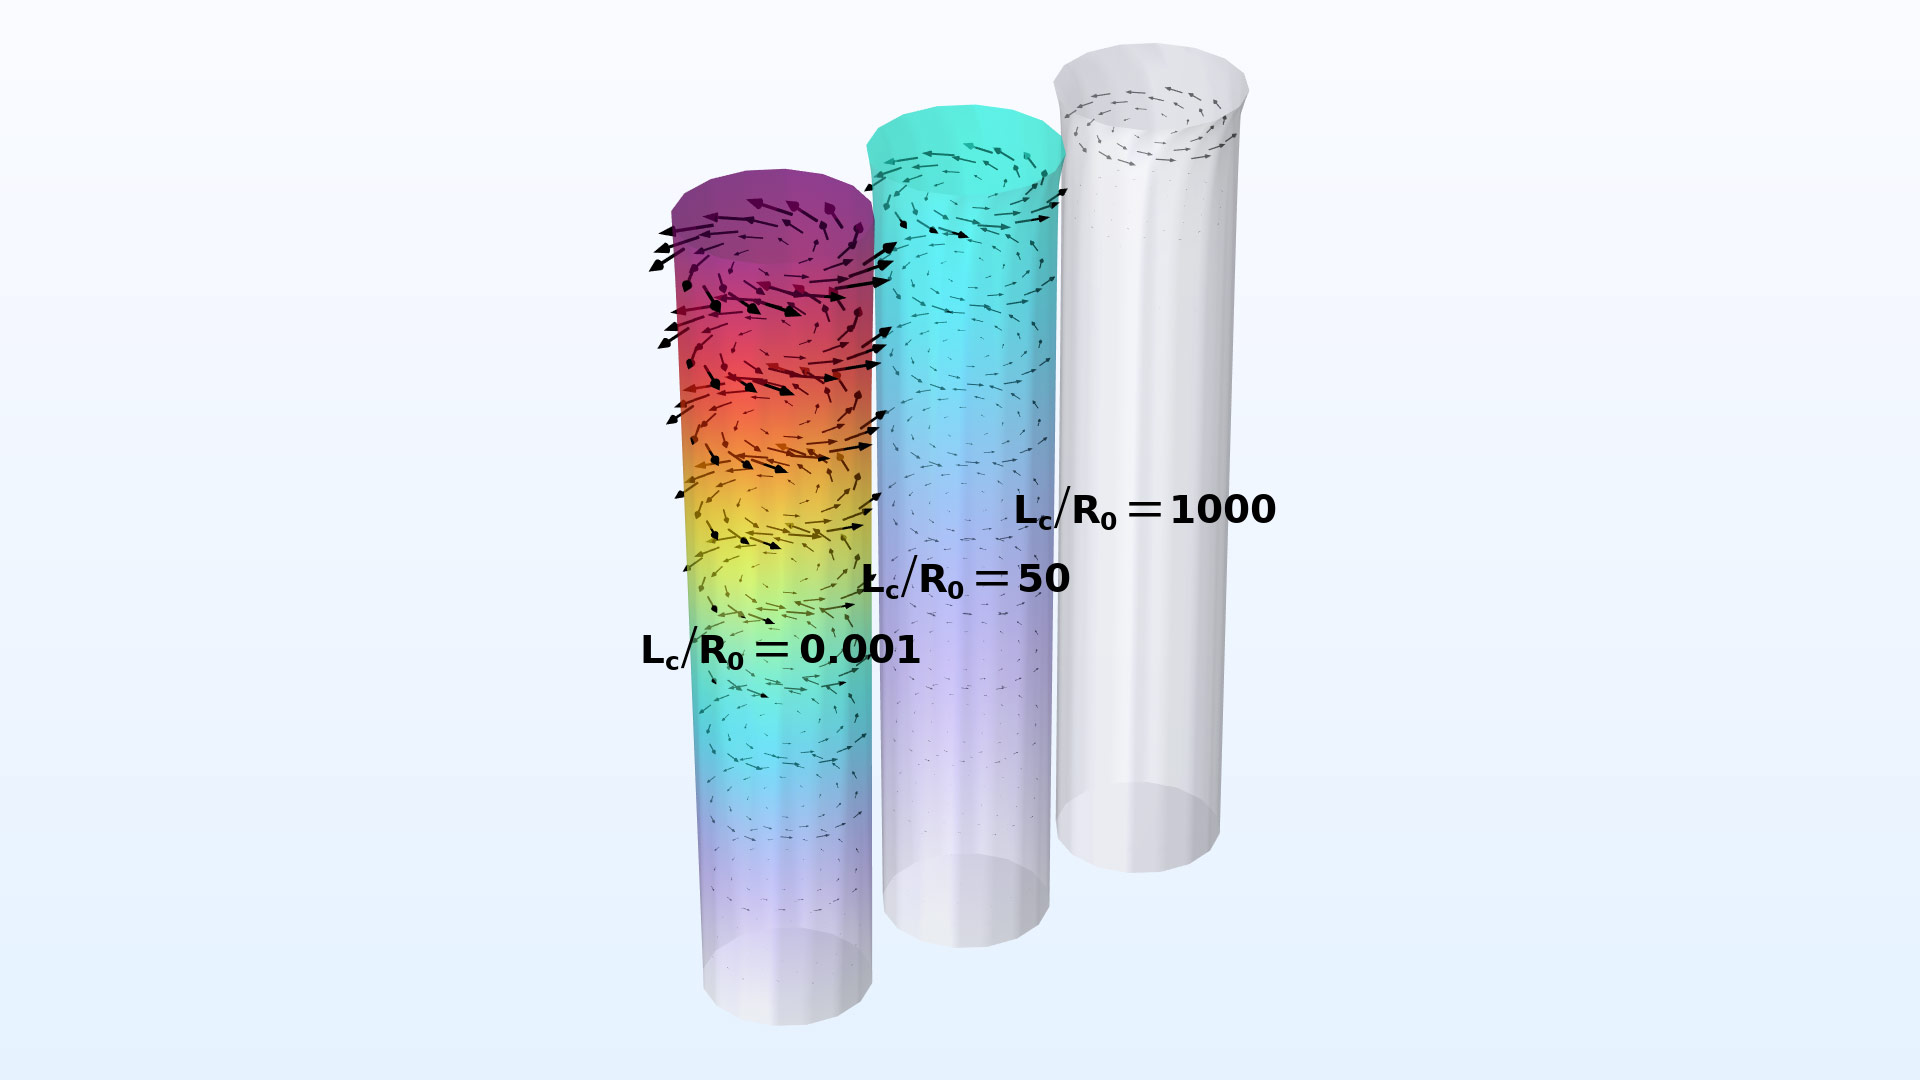 Three cylinder models in the Prism color table.